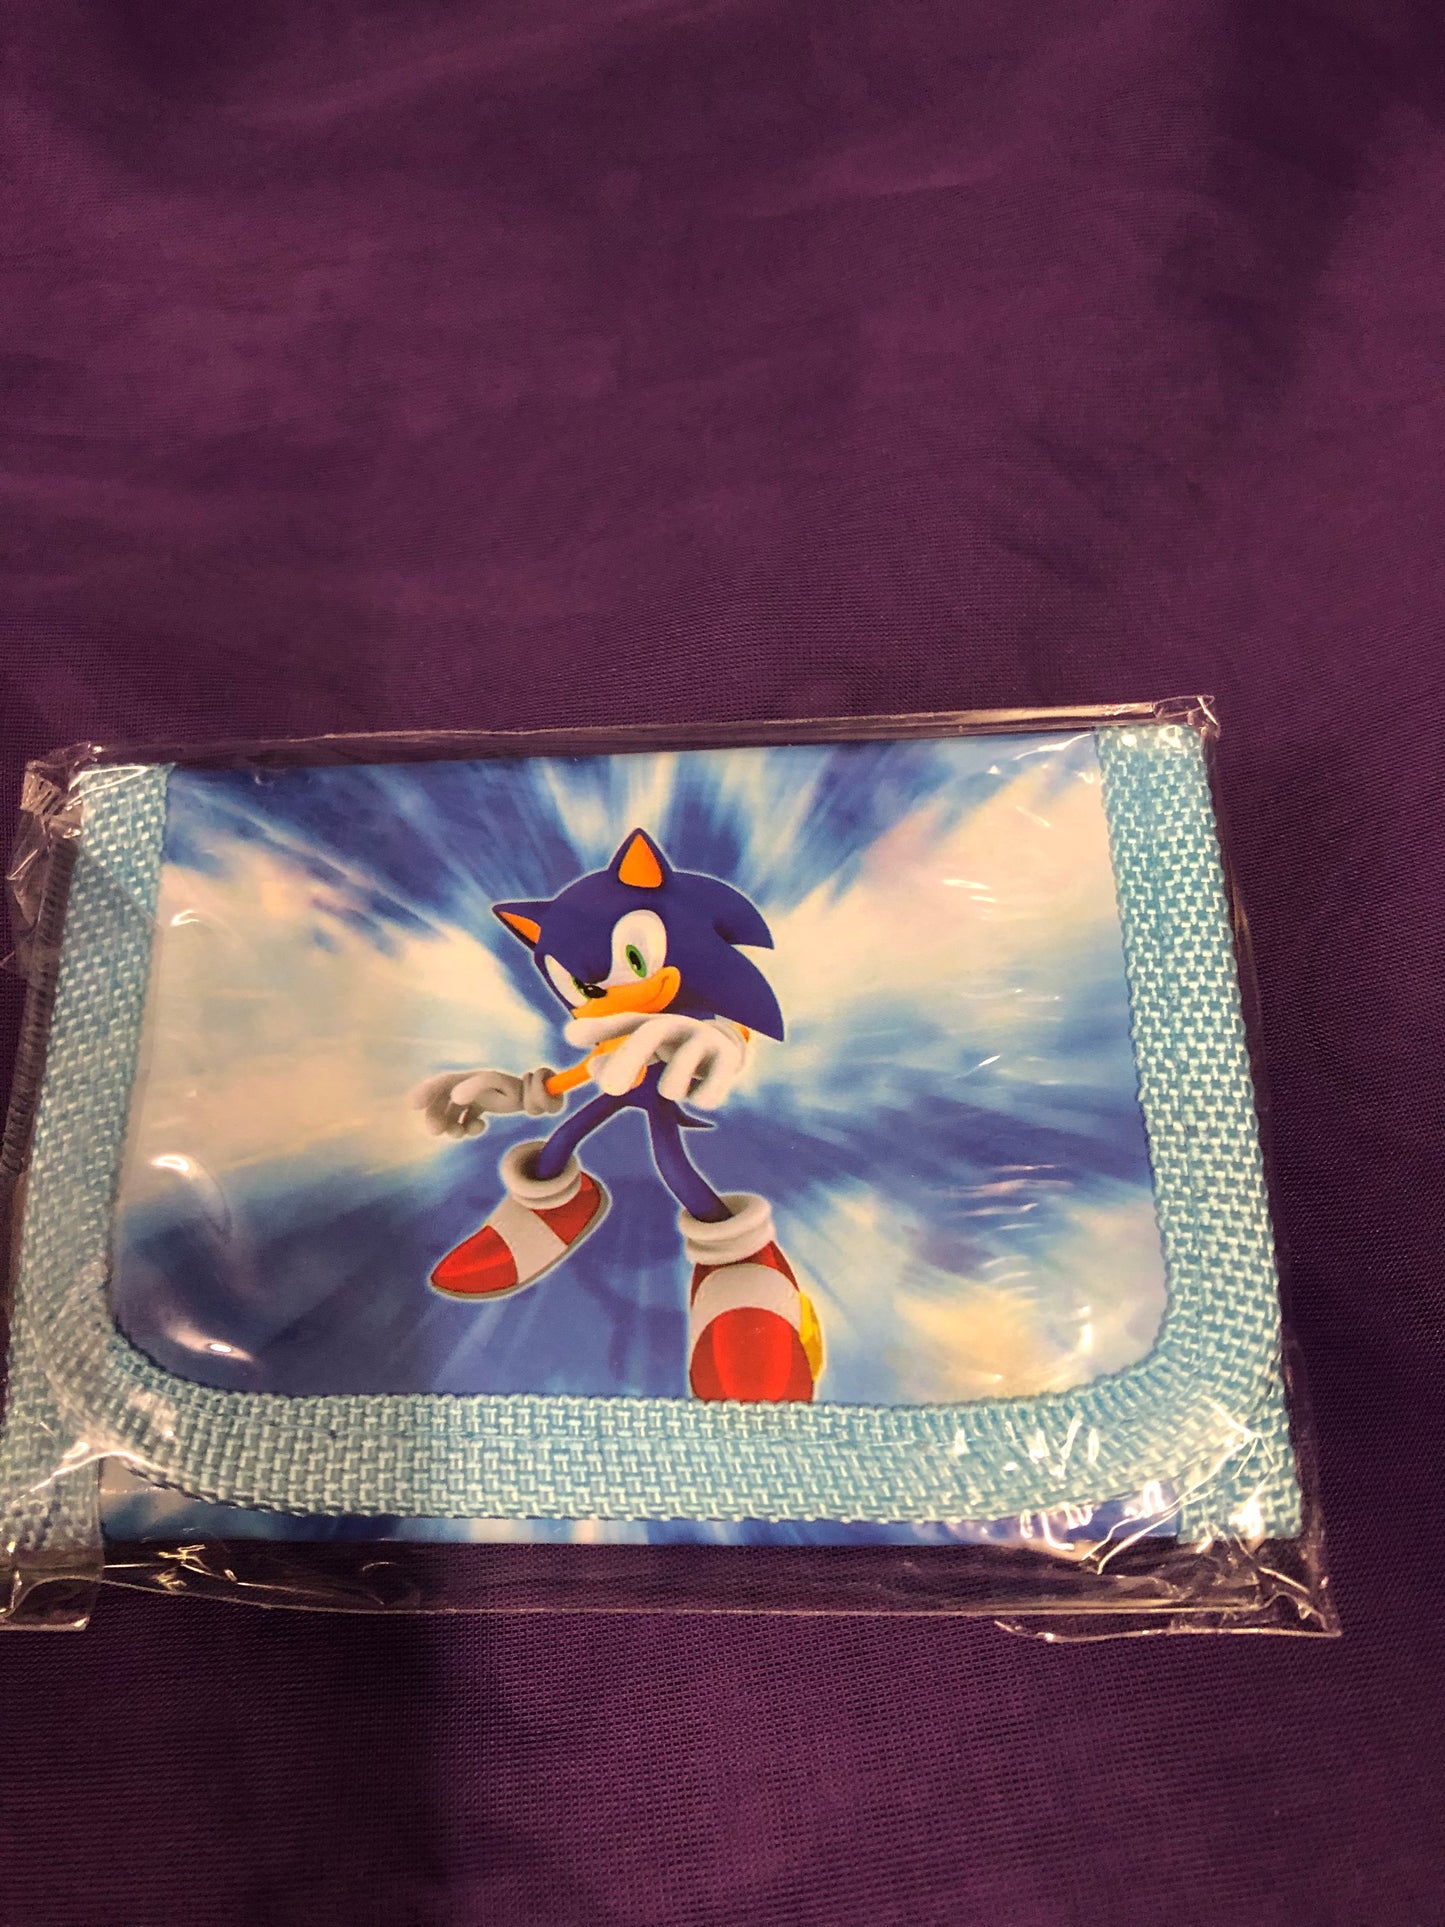 Kids Sonic Wallets "New Arrival" Colors; Sky Blue,Yellow, And Green @ 15.00 Ea.